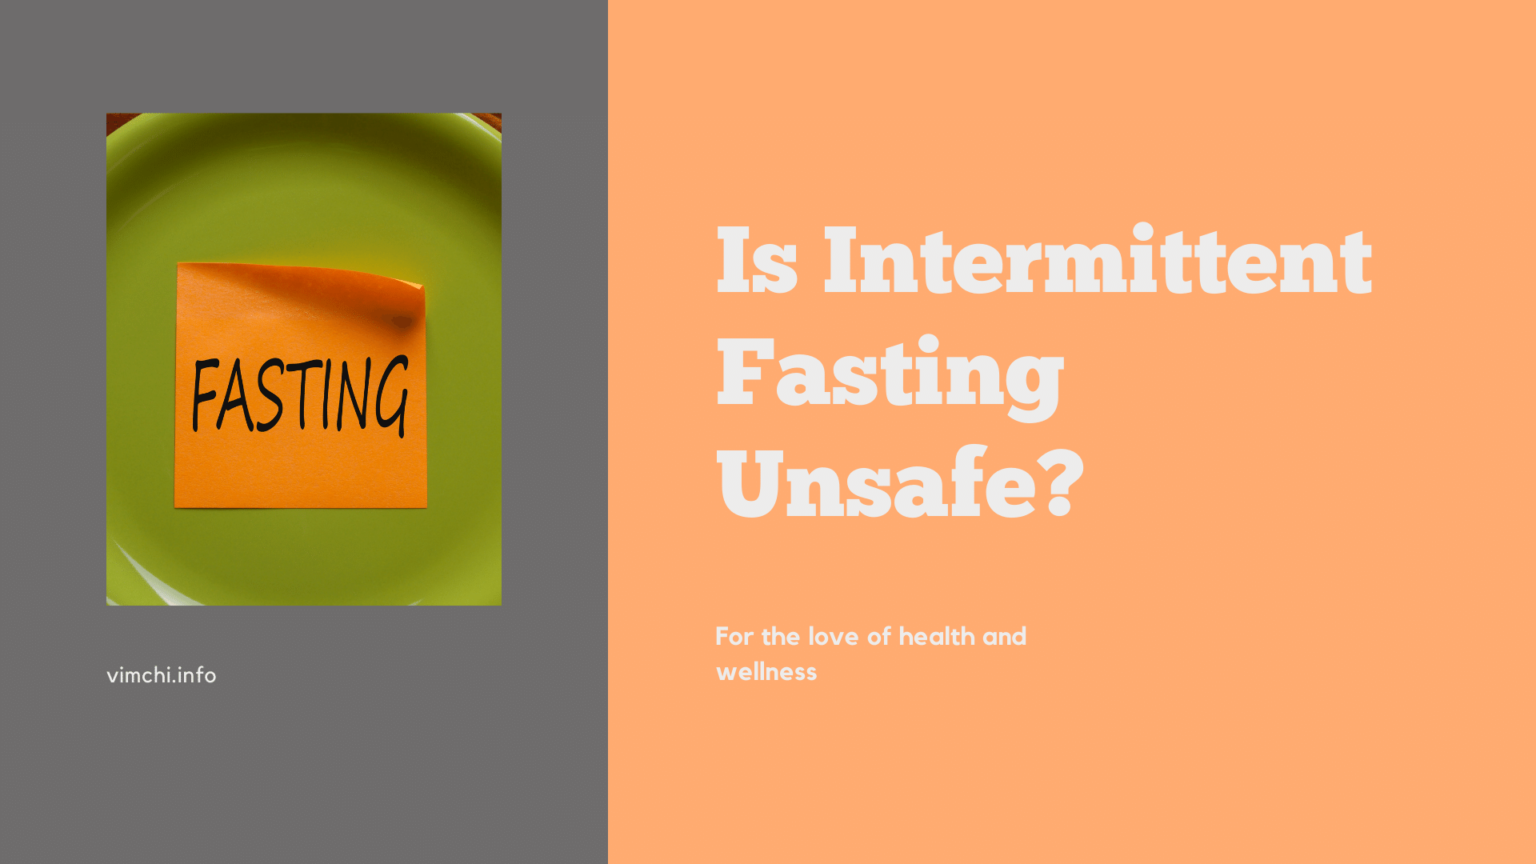 Can Intermittent Fasting Cause Hair Loss?